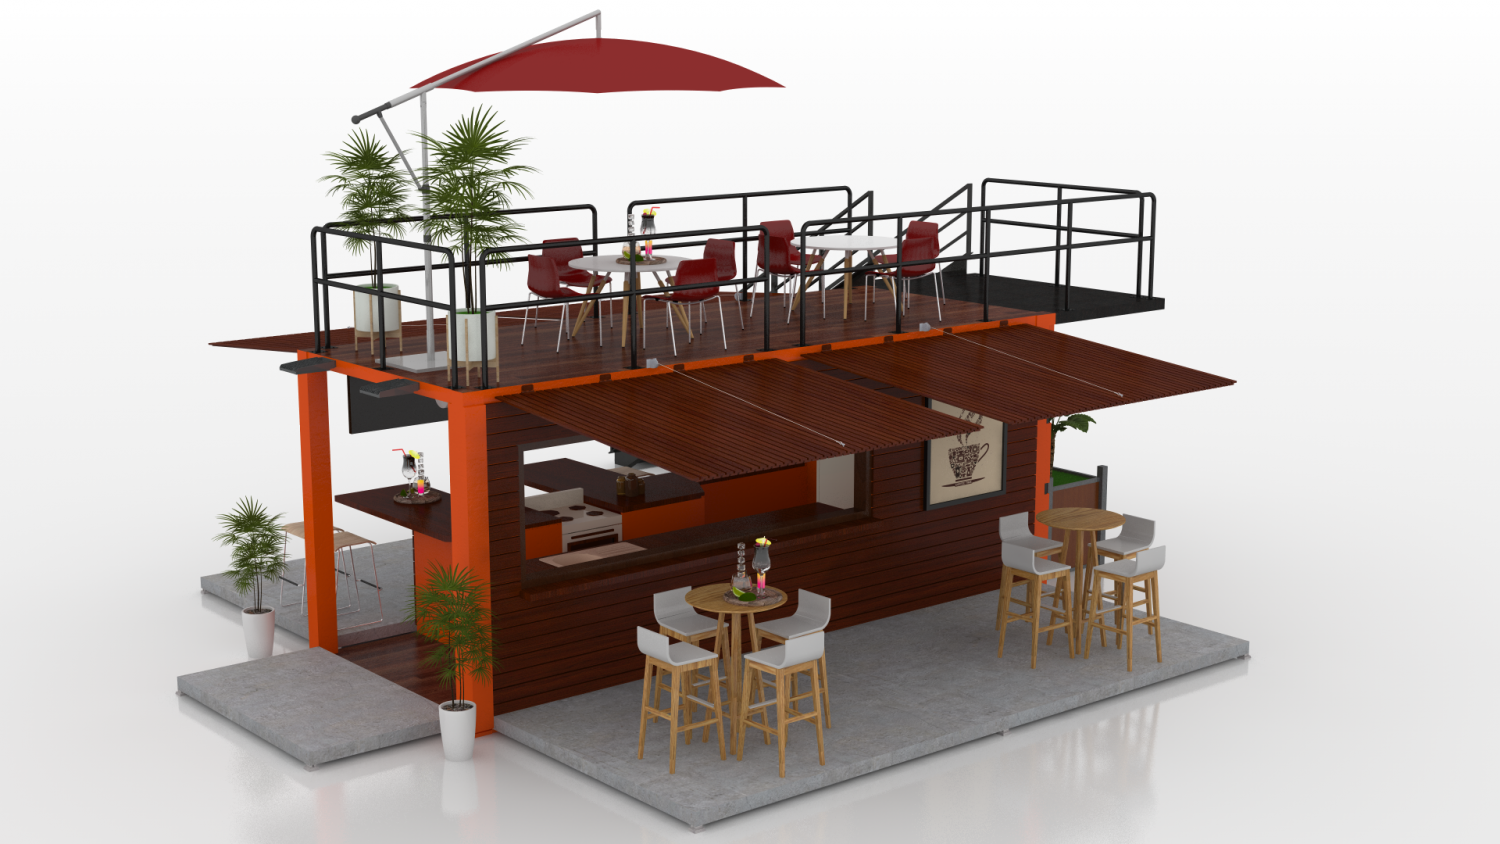 udzign on X: 3D Model Coffe Stall Booth - Coffee Cart - Coffee Stand  Download Now !  #coffee #stall #booth #beverage #3d # stand #cart #coffeebike #coffeestall  / X